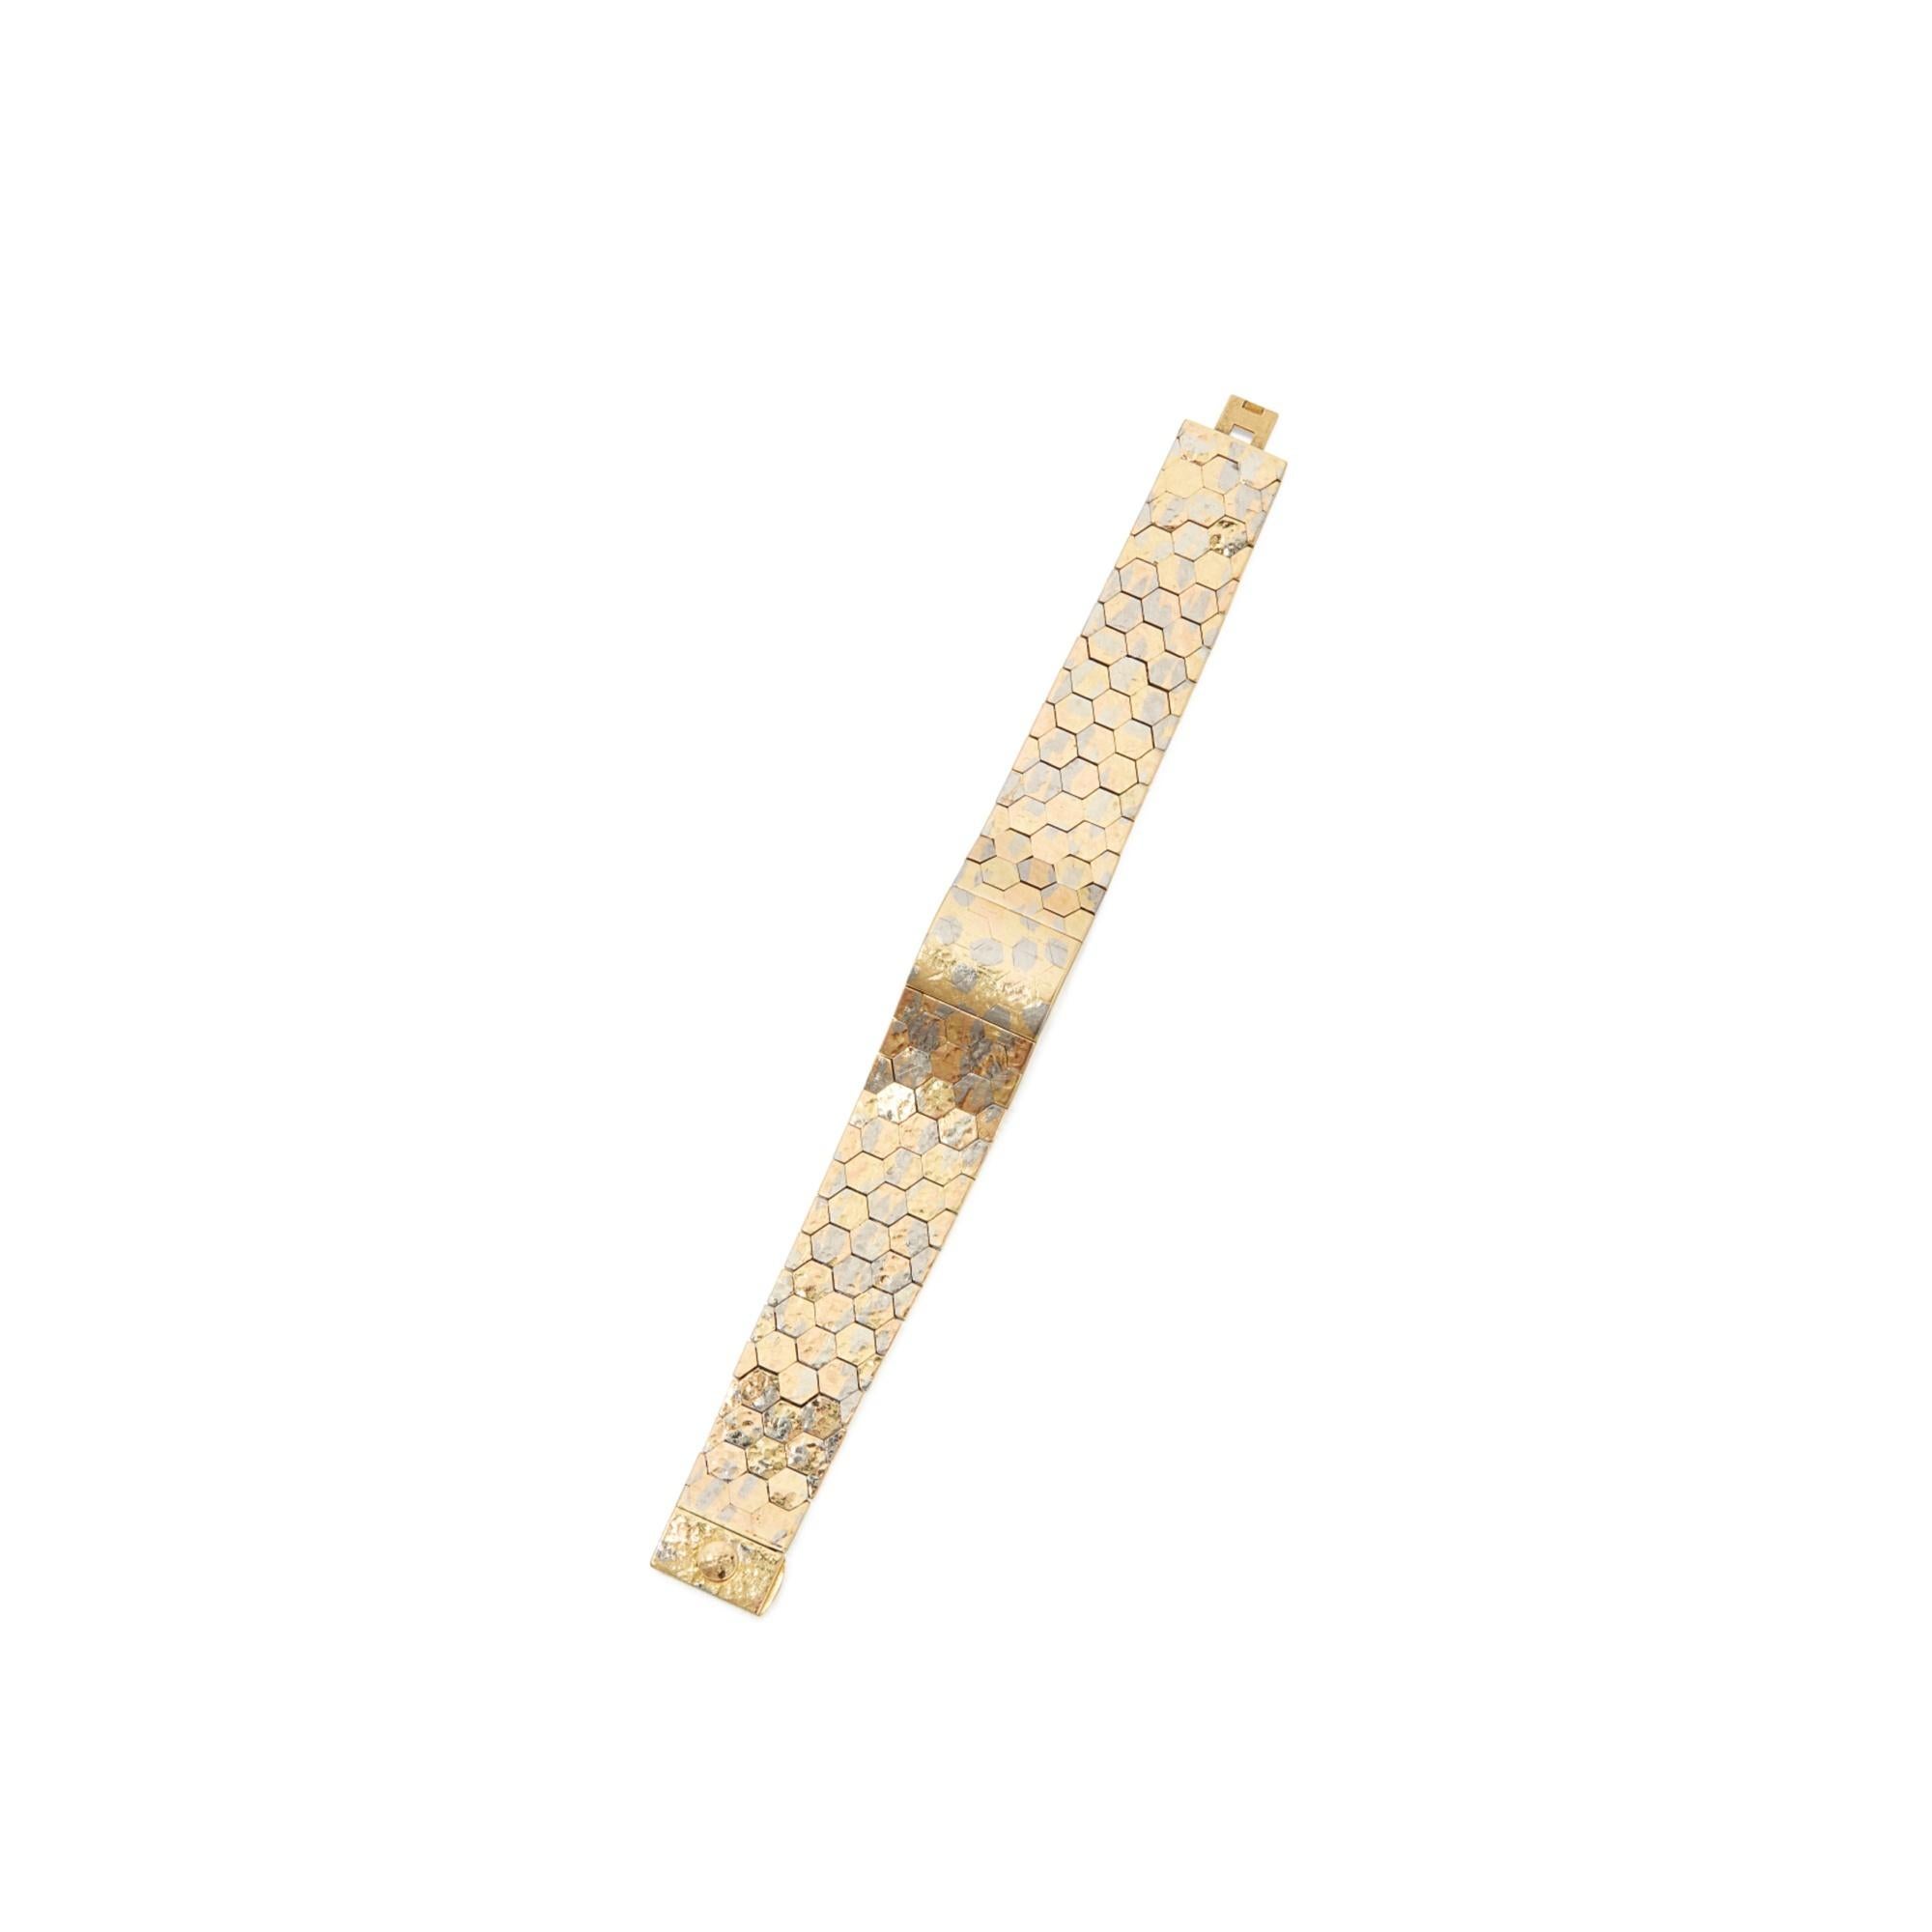 Two-Color Gold Lady's Wristwatch by Patek Philippe
The bracelet composed of textured white and yellow gold hexagonal links, concealing a round dial featuring gold baton indicators, manual movement, gross weight approximately 54 dwts, length 6¾